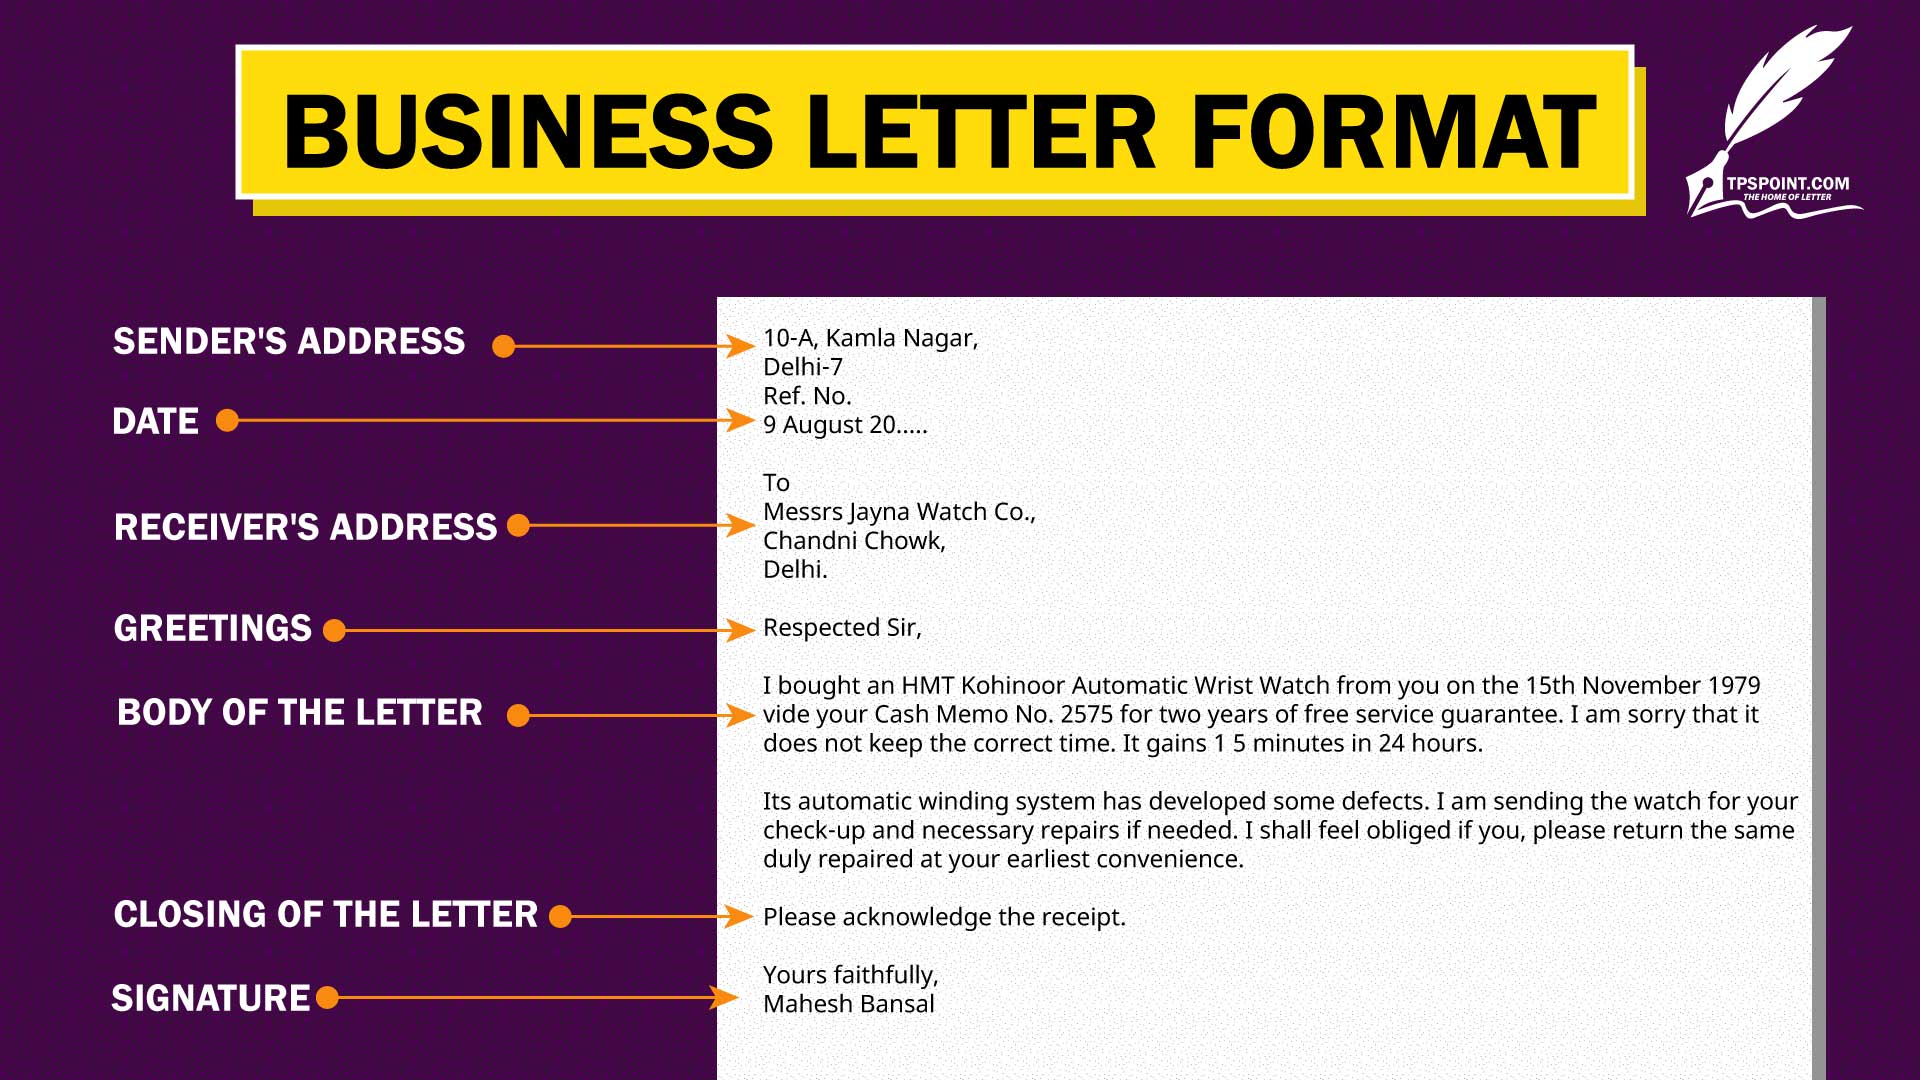 Business Letter Example Format